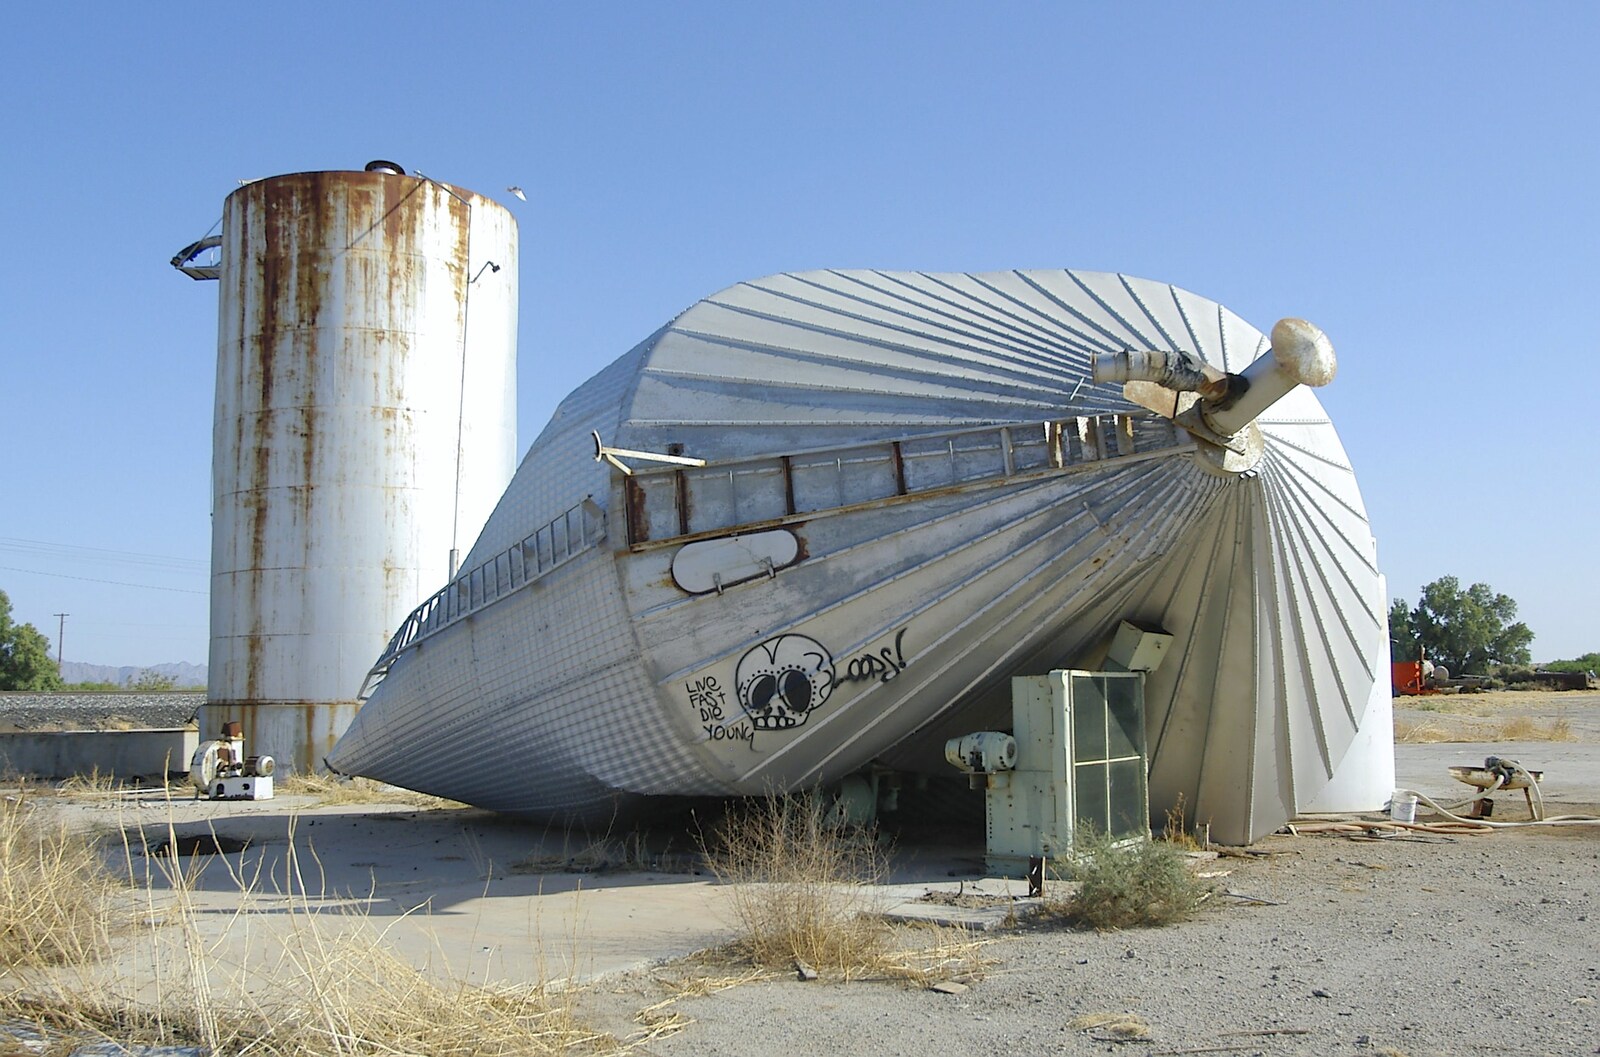 A collapsed grain silo near Blaisdell, Arizona from San Diego Seven: The Desert and the Dunes, Arizona and California, US - 22nd April